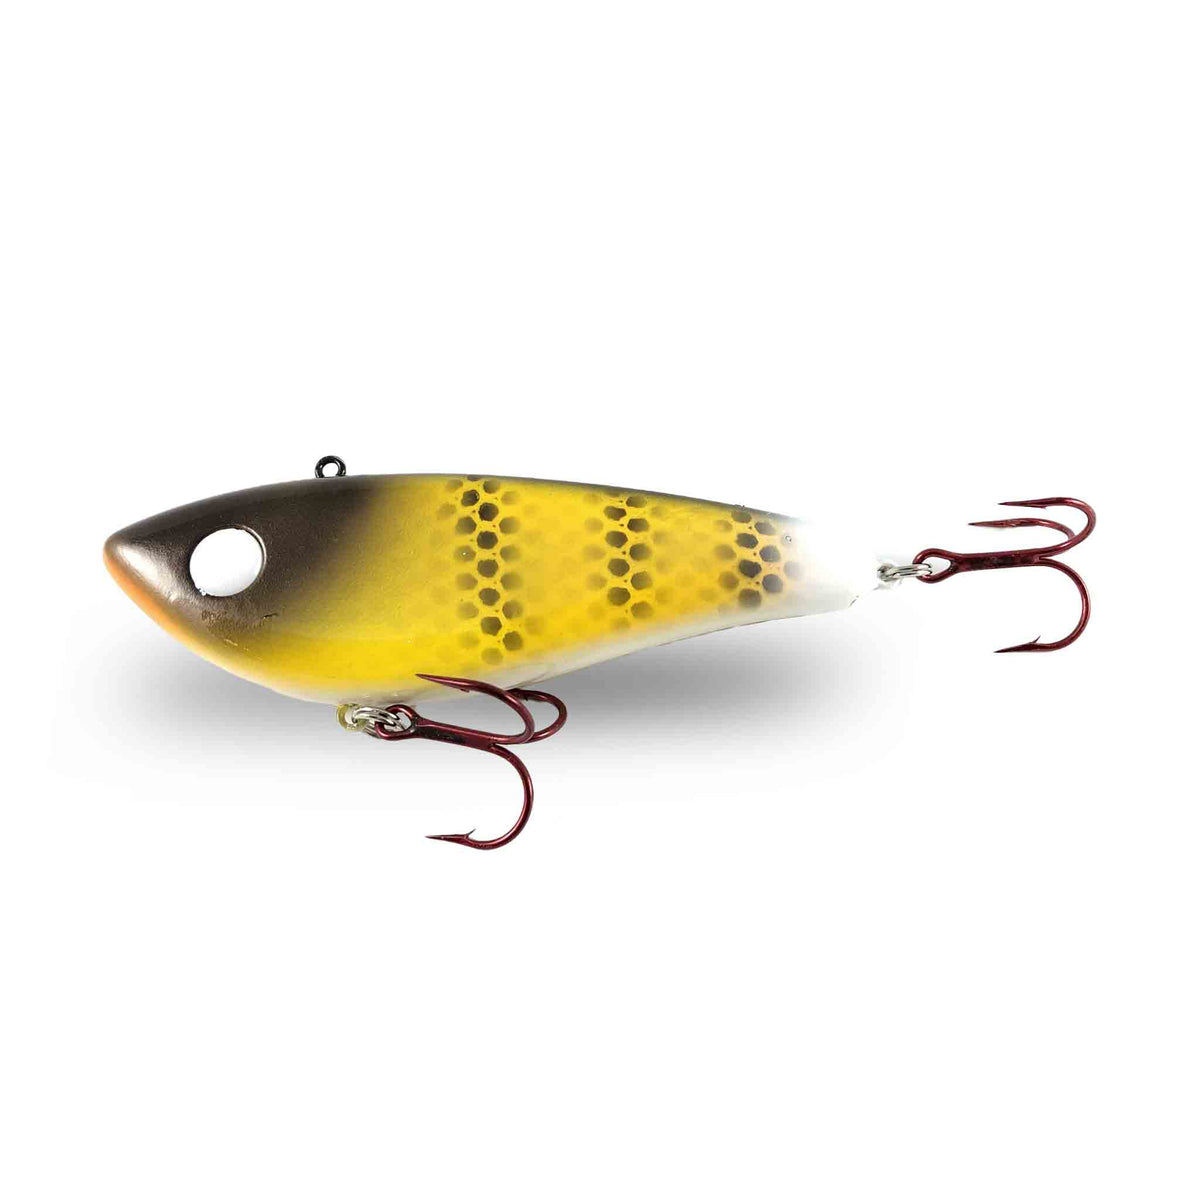 Legend Lures! All 4 models are in stock for a limited time! These amazing  crankbaits are highly regarded by the big fish trolling community!